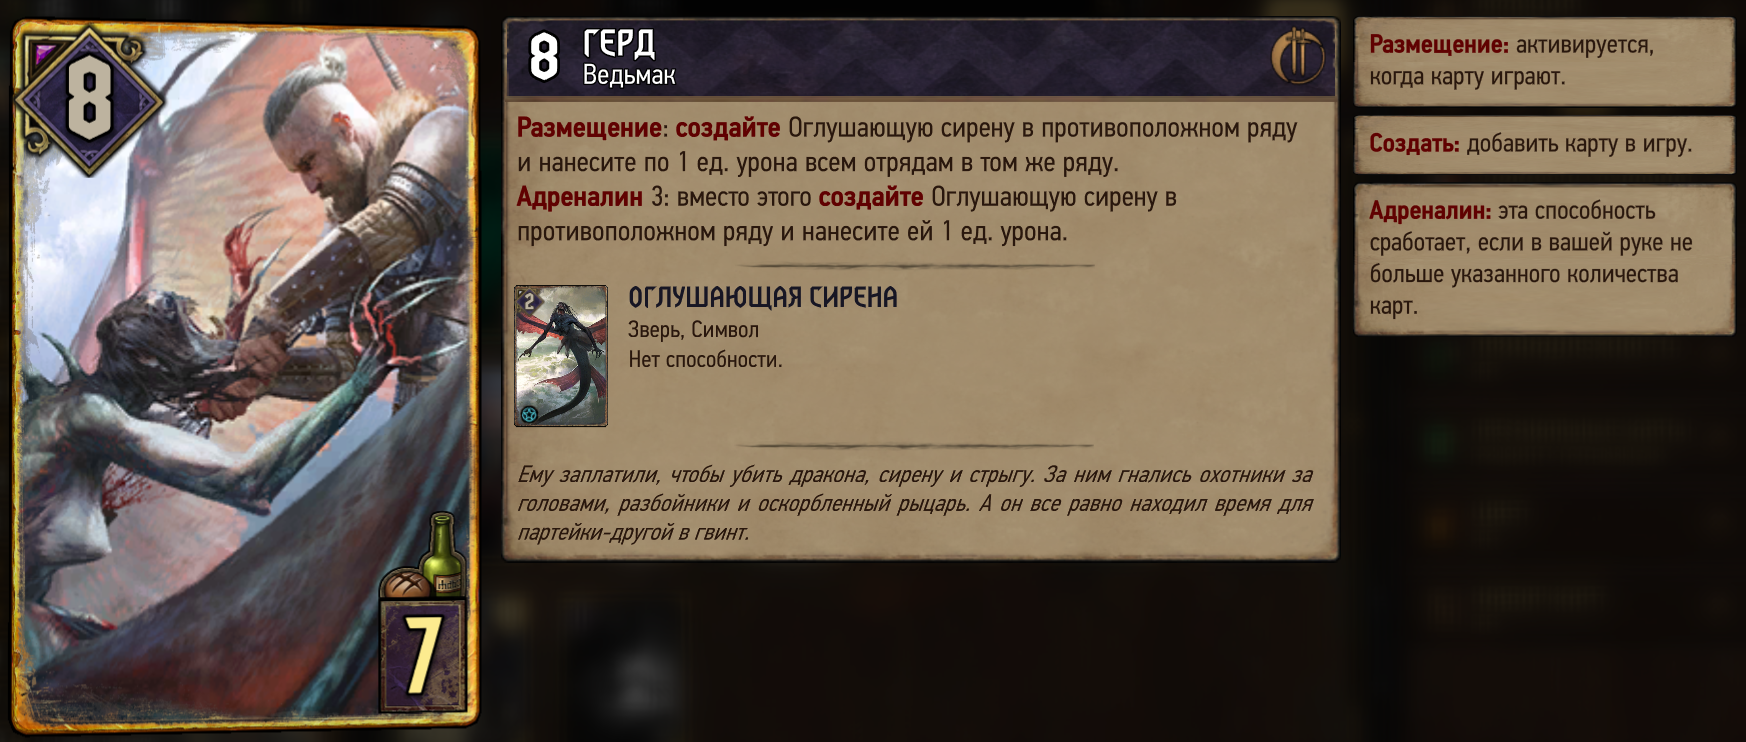 Герд.png